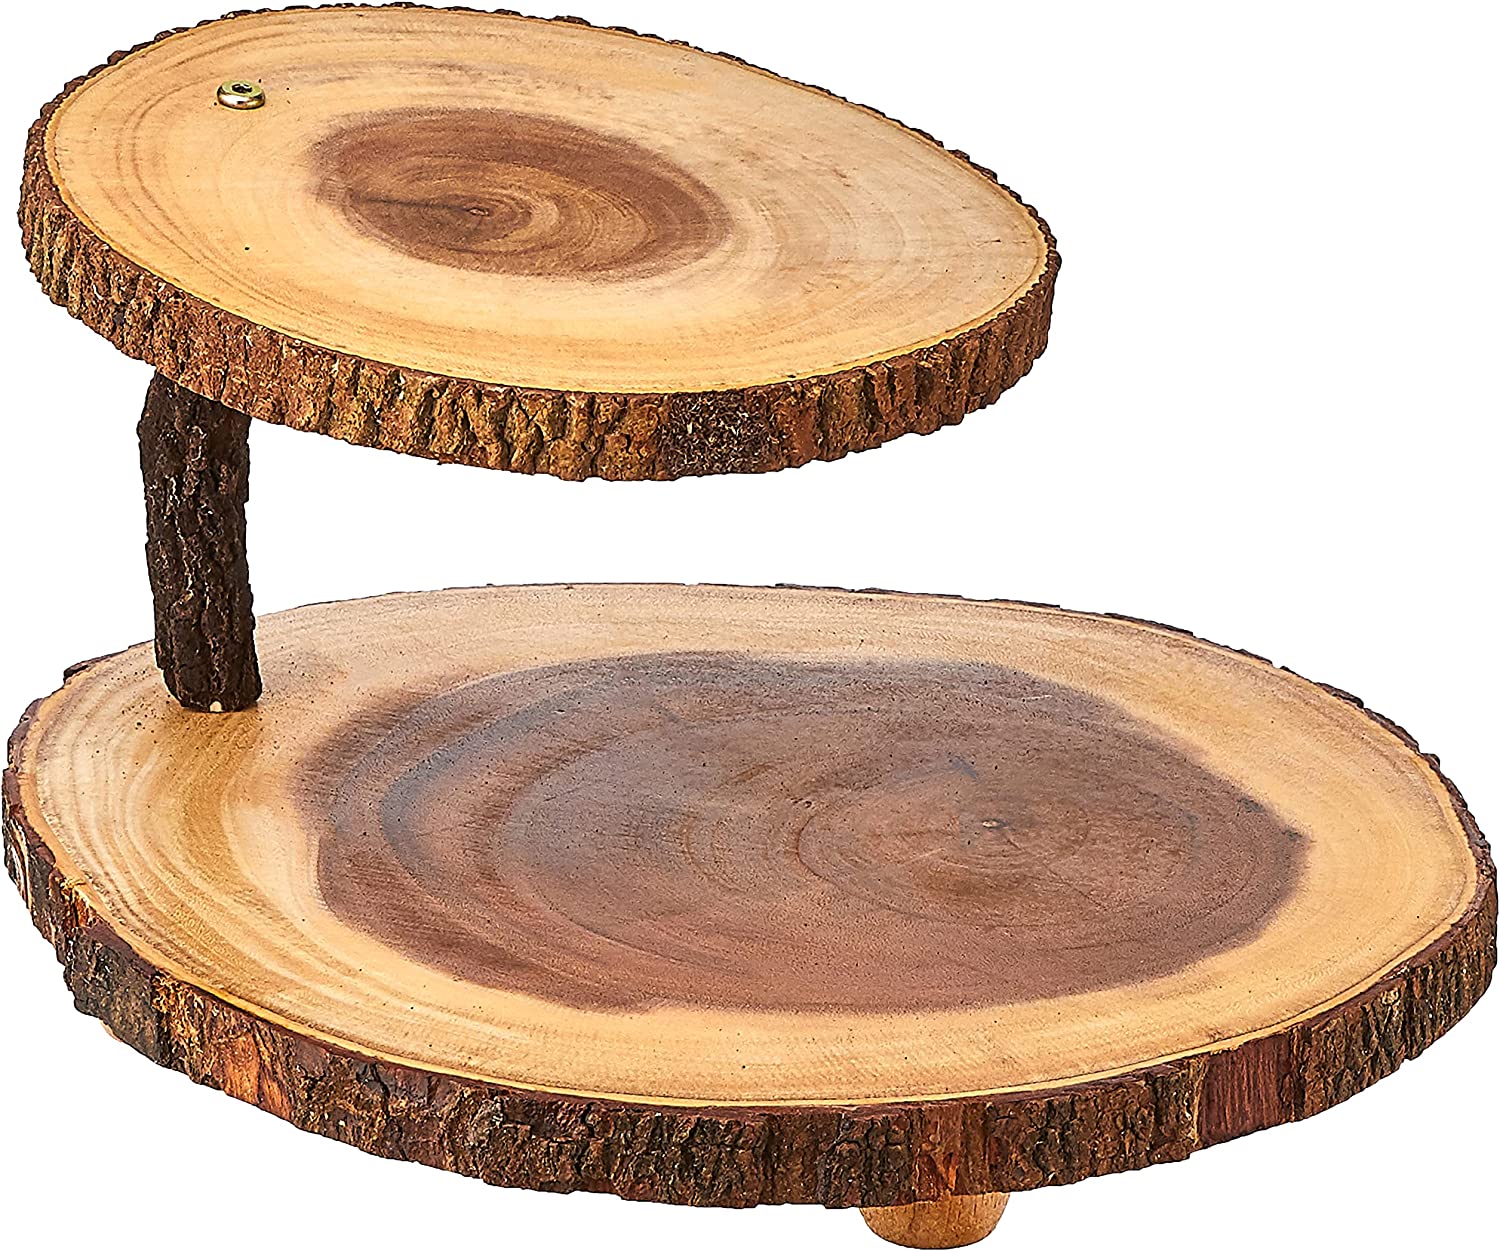 Acacia 2-Tier Tree Bark Server for Meats & Cheeses $11.22 shipped w/ Prime